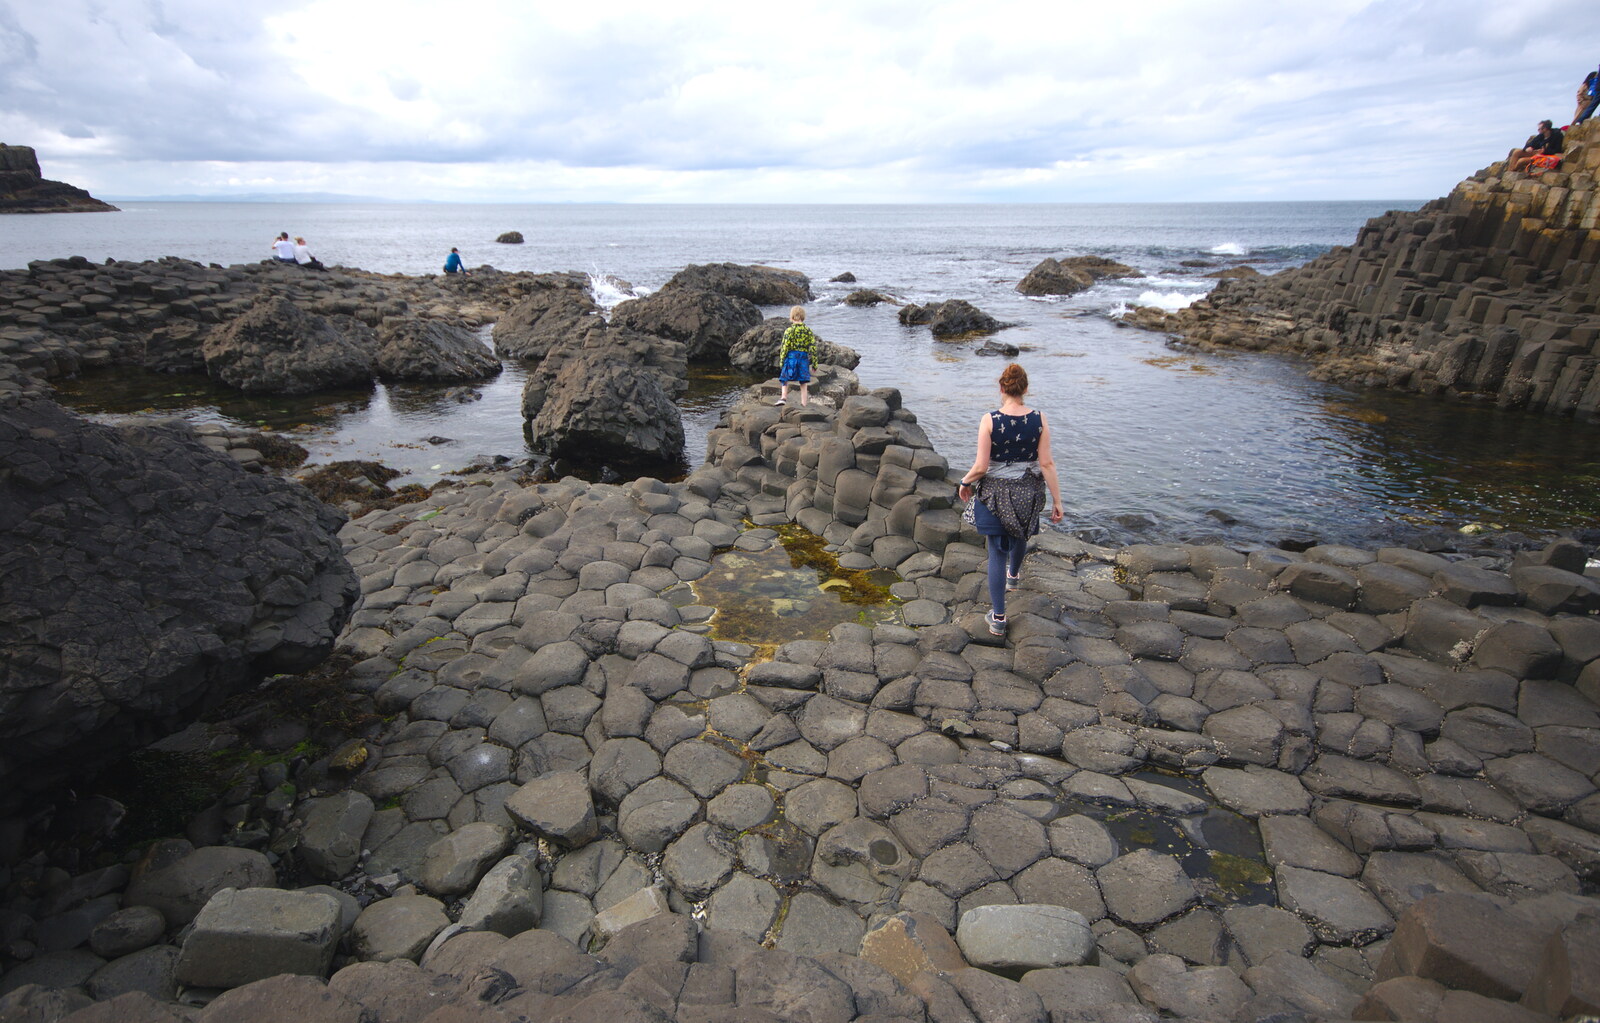 Isobel roams around from The Giant's Causeway, Bushmills, County Antrim, Northern Ireland - 14th August 2019